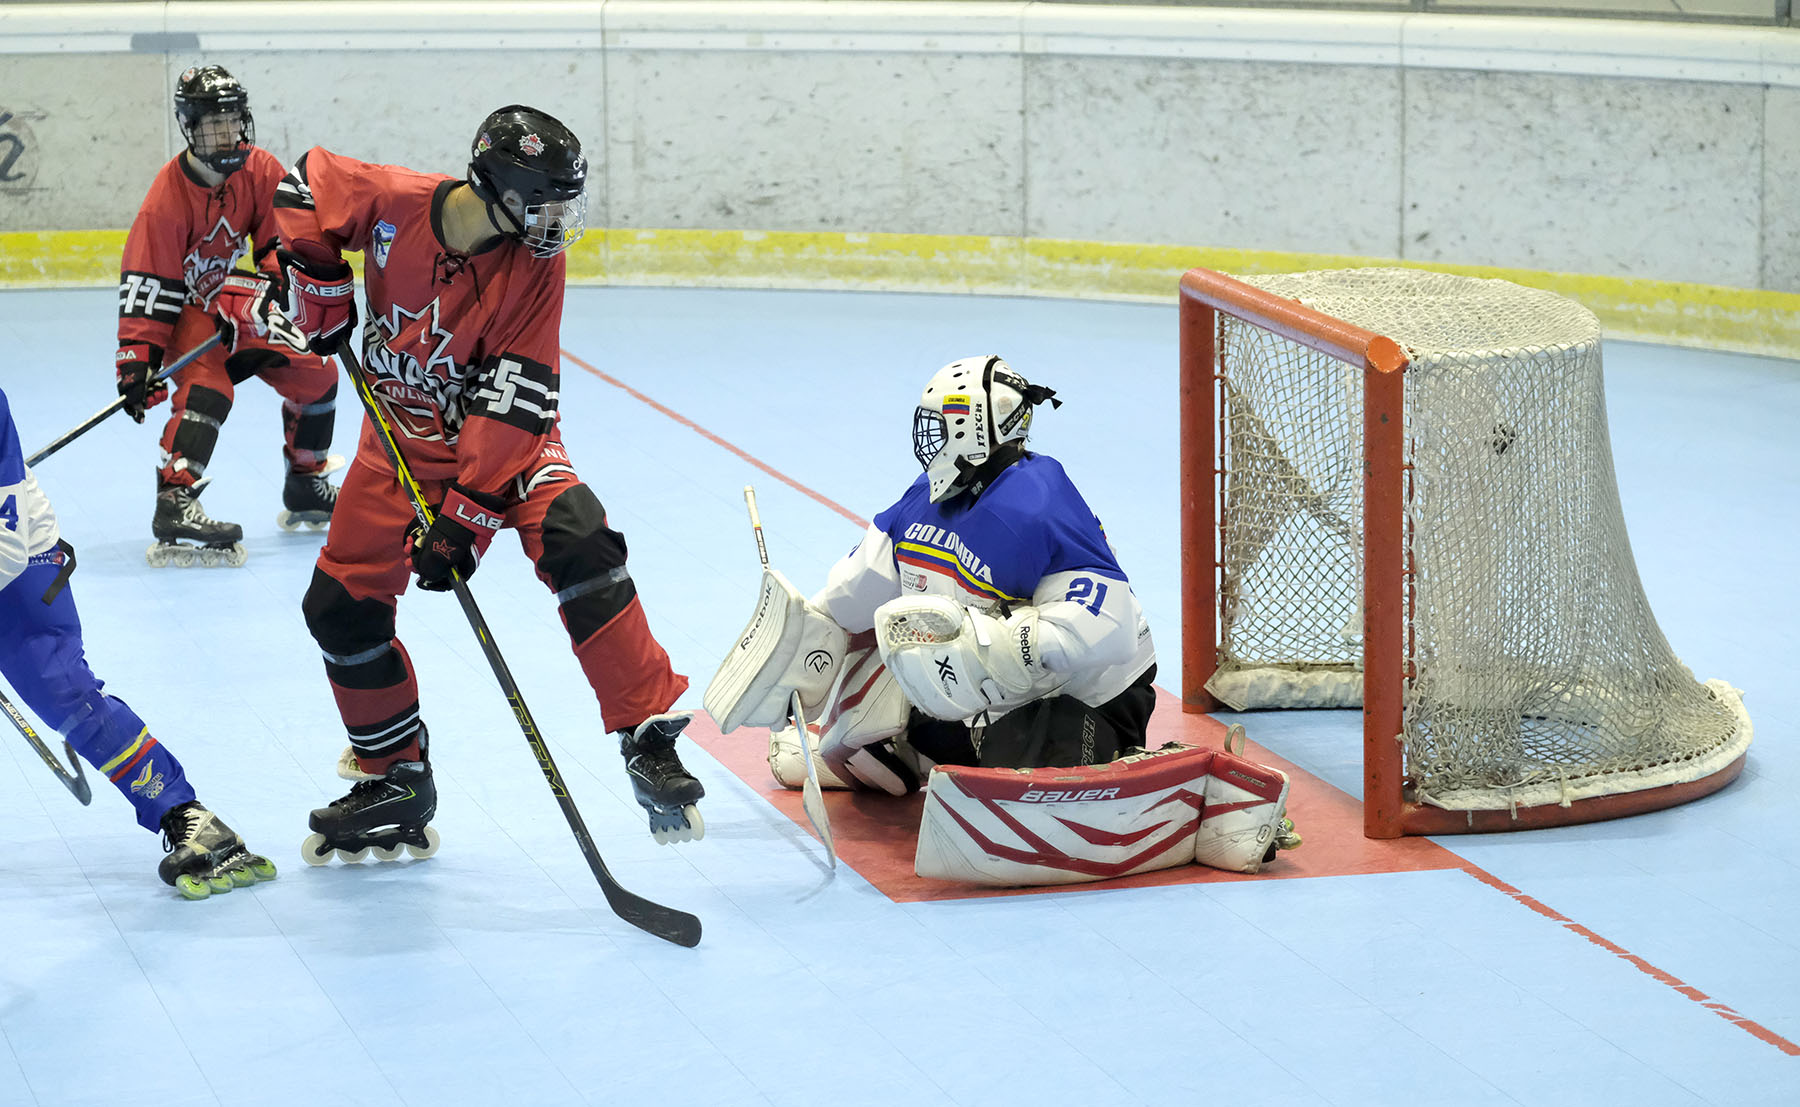 Skateboarding and Roller Sports - Inline Hockey World Championships 2018 defined the quarter finals matches